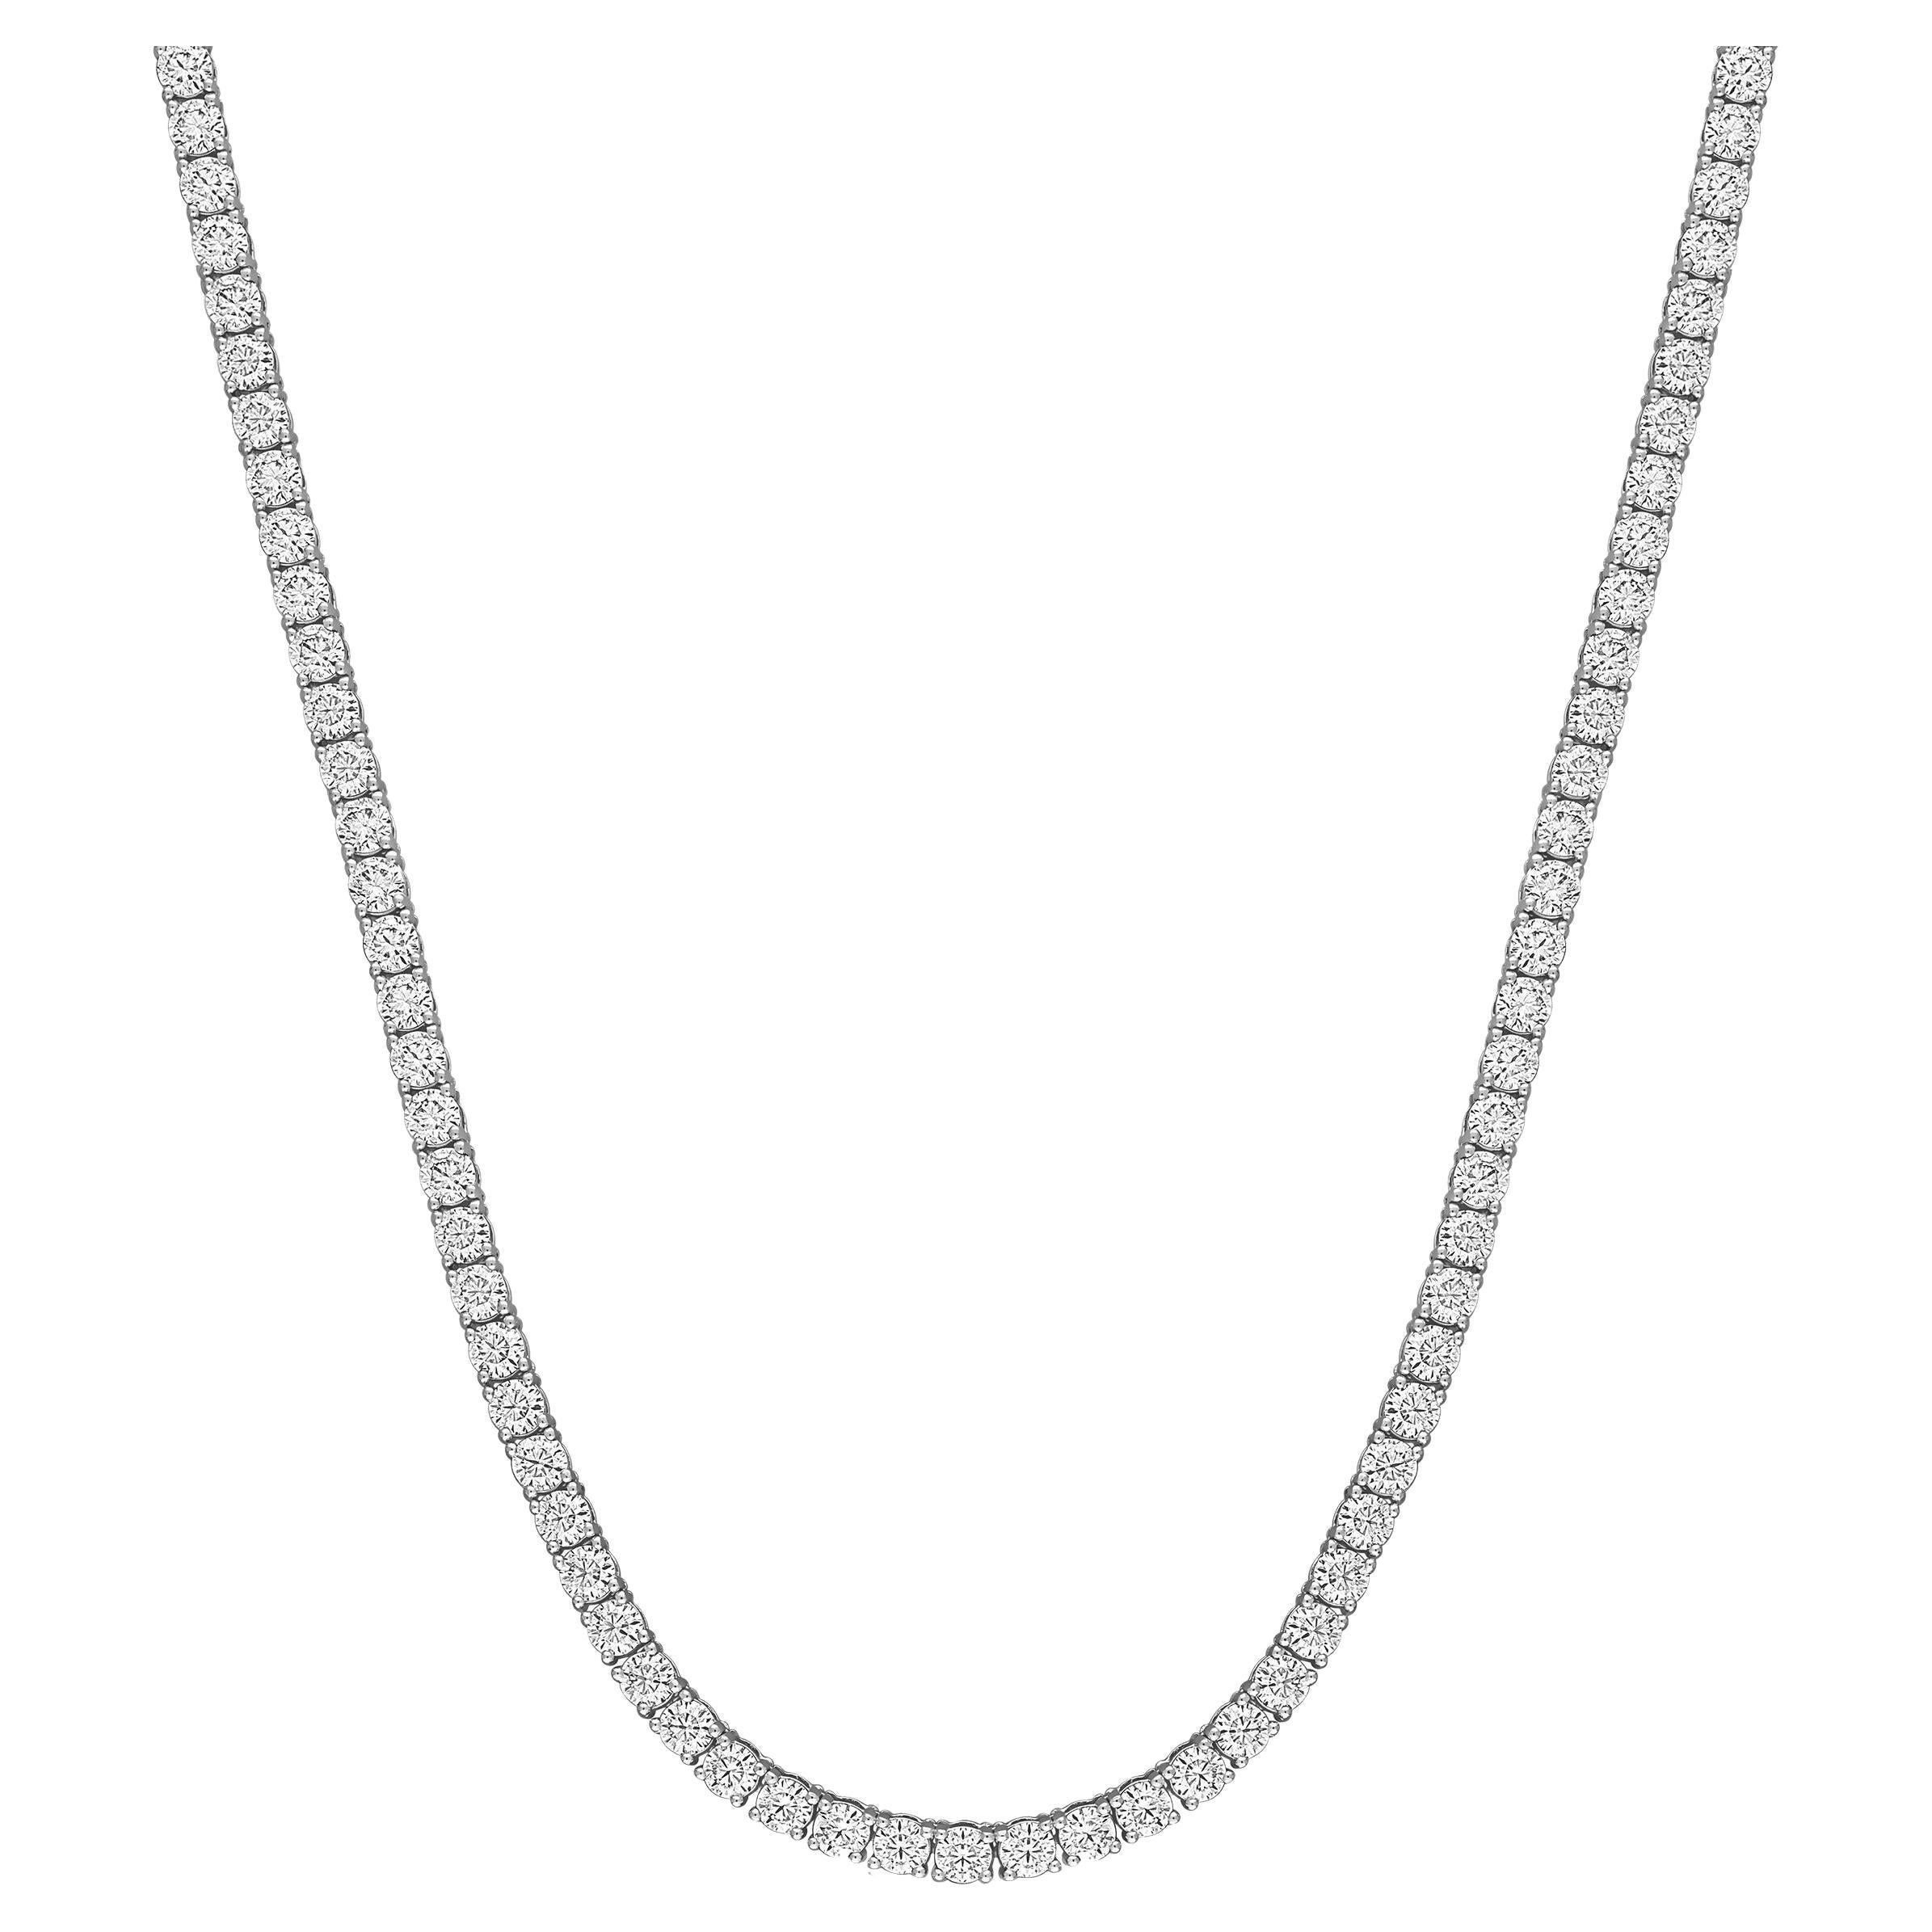 18 Carat Diamond Tennis Necklace in 14K White Gold For Sale